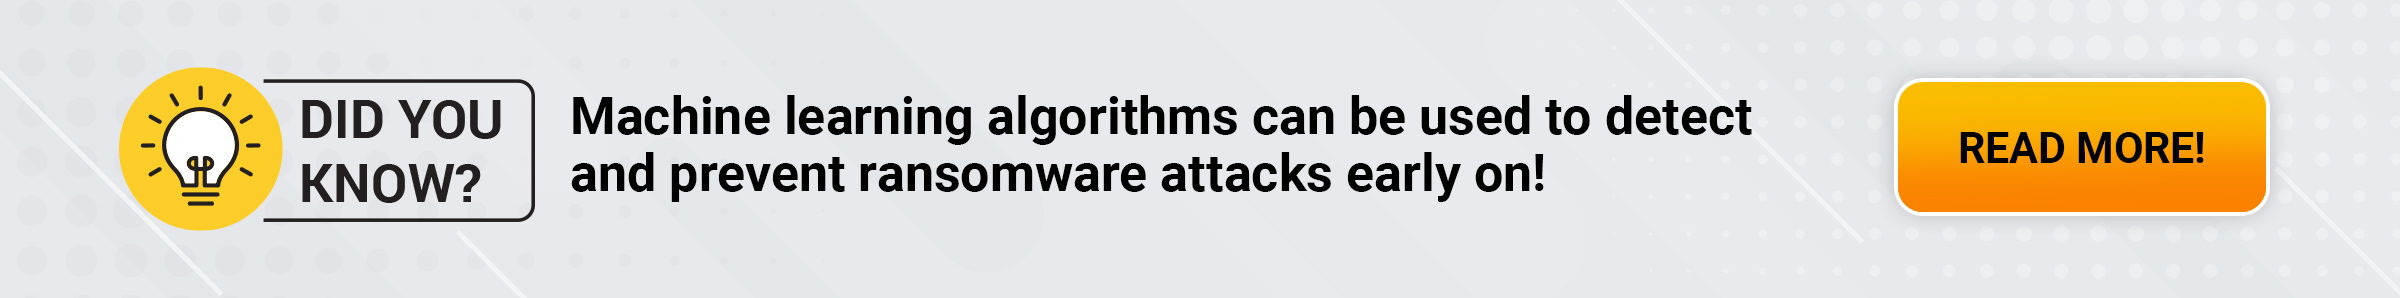 Machine learning algorithms can be used to detect and prevent ransomware attacks early on!